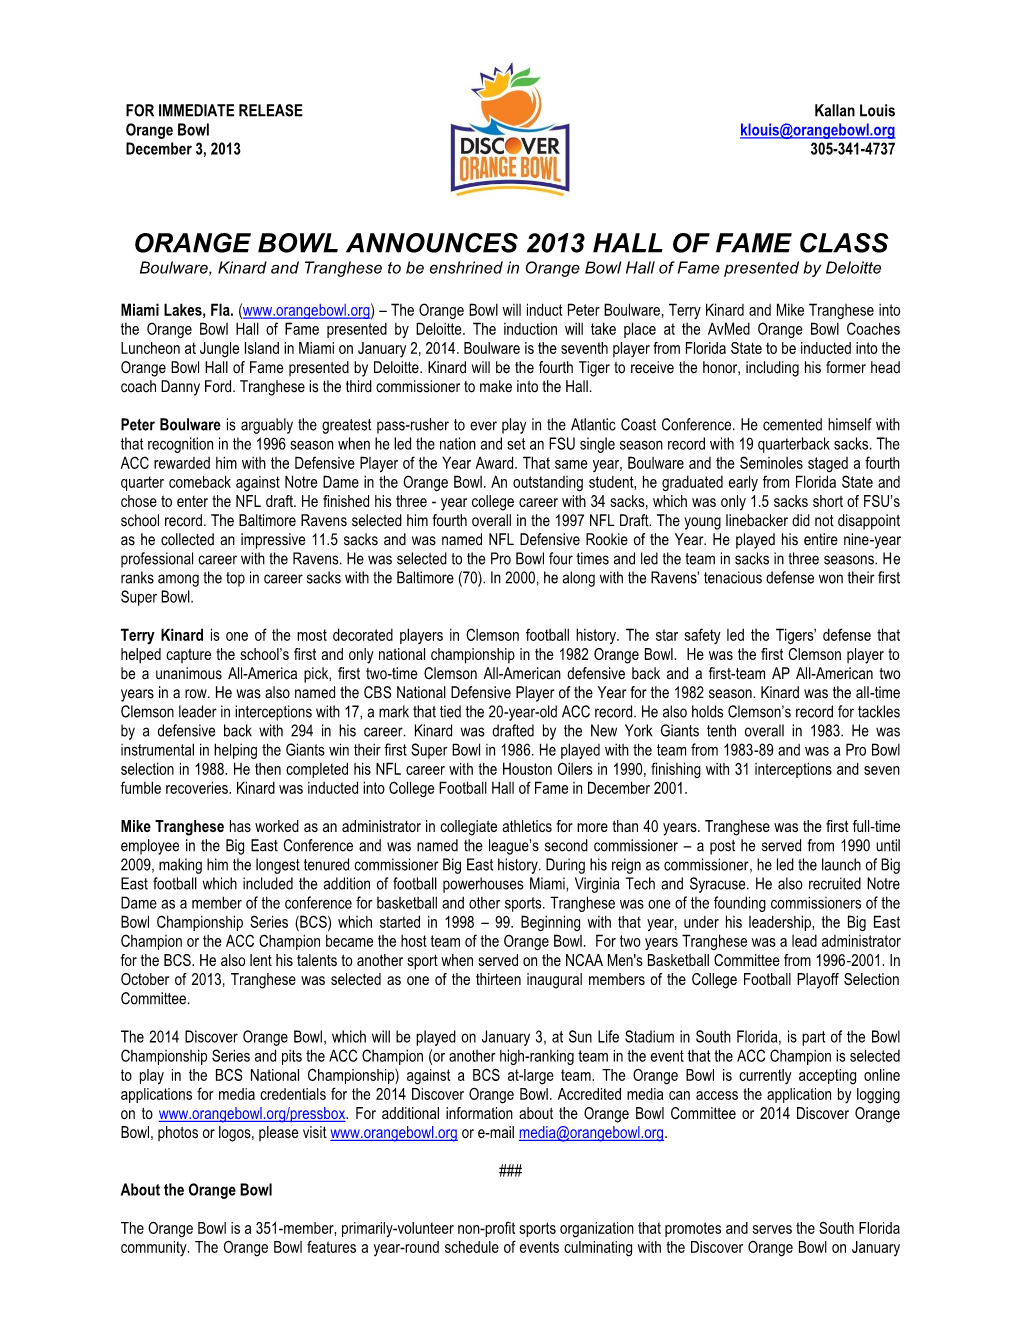 ORANGE BOWL ANNOUNCES 2013 HALL of FAME CLASS Boulware, Kinard and Tranghese to Be Enshrined in Orange Bowl Hall of Fame Presented by Deloitte